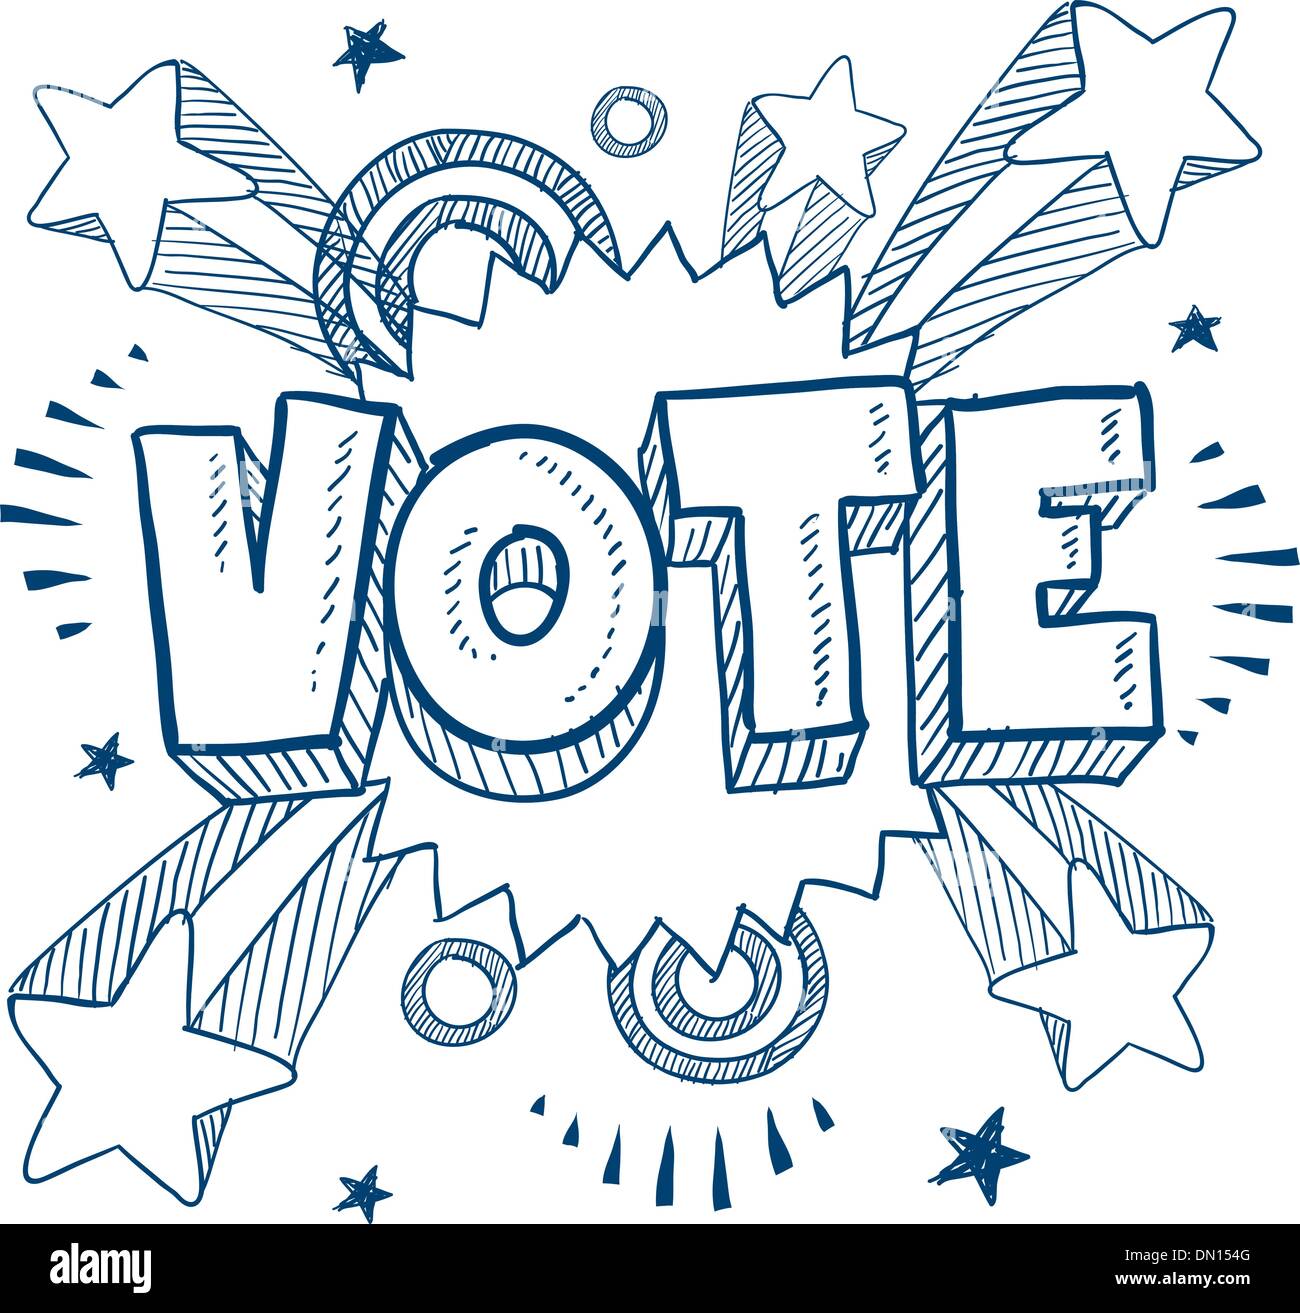 691 Ballot Sketch Royalty-Free Images, Stock Photos & Pictures |  Shutterstock